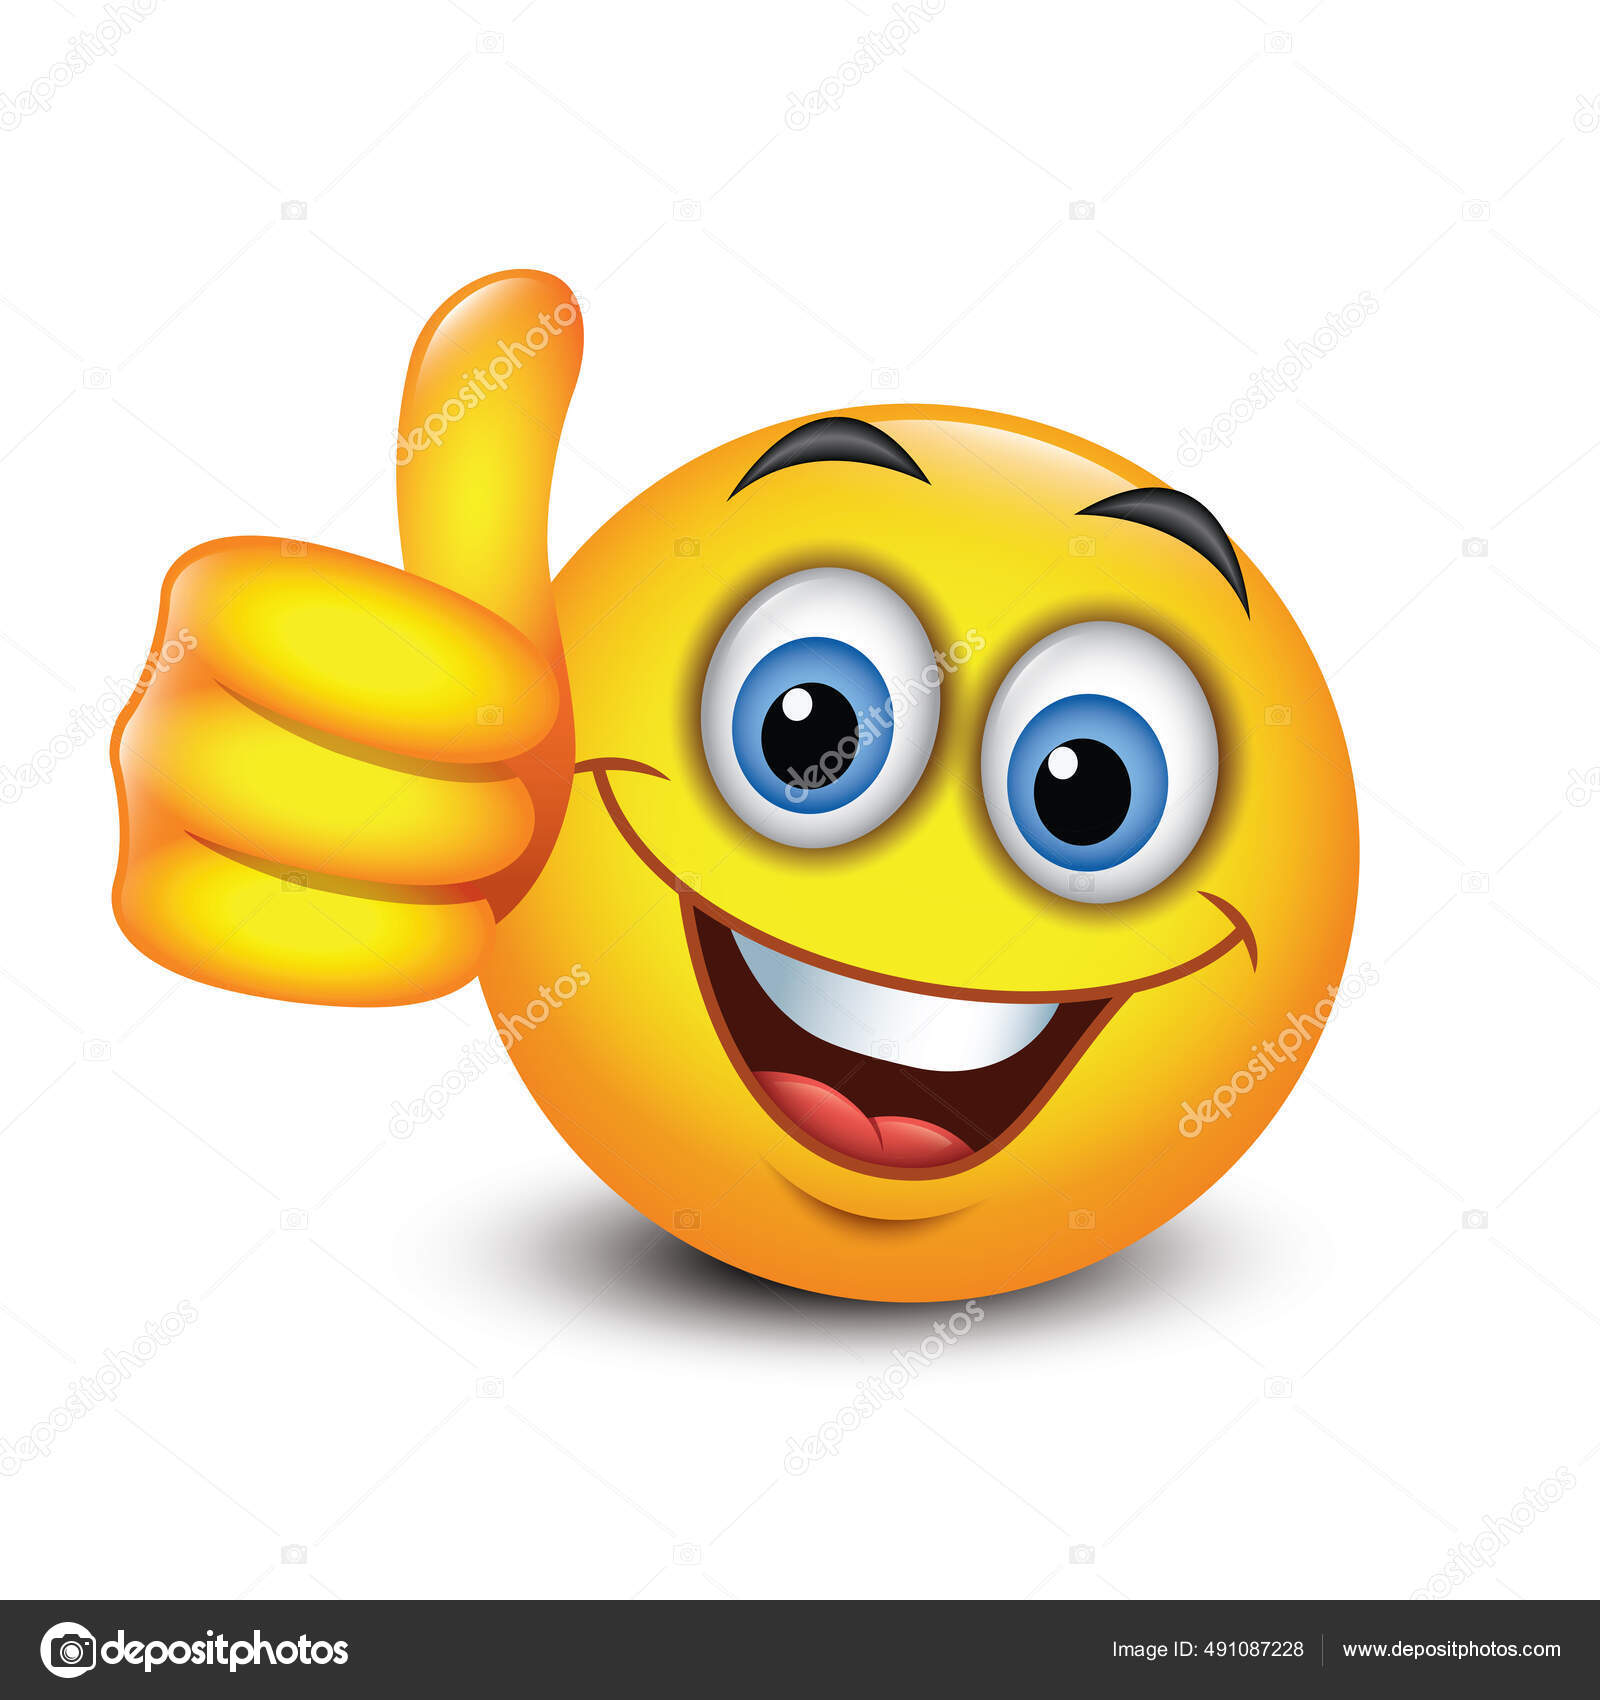 Smiley Faces With Thumbs Up